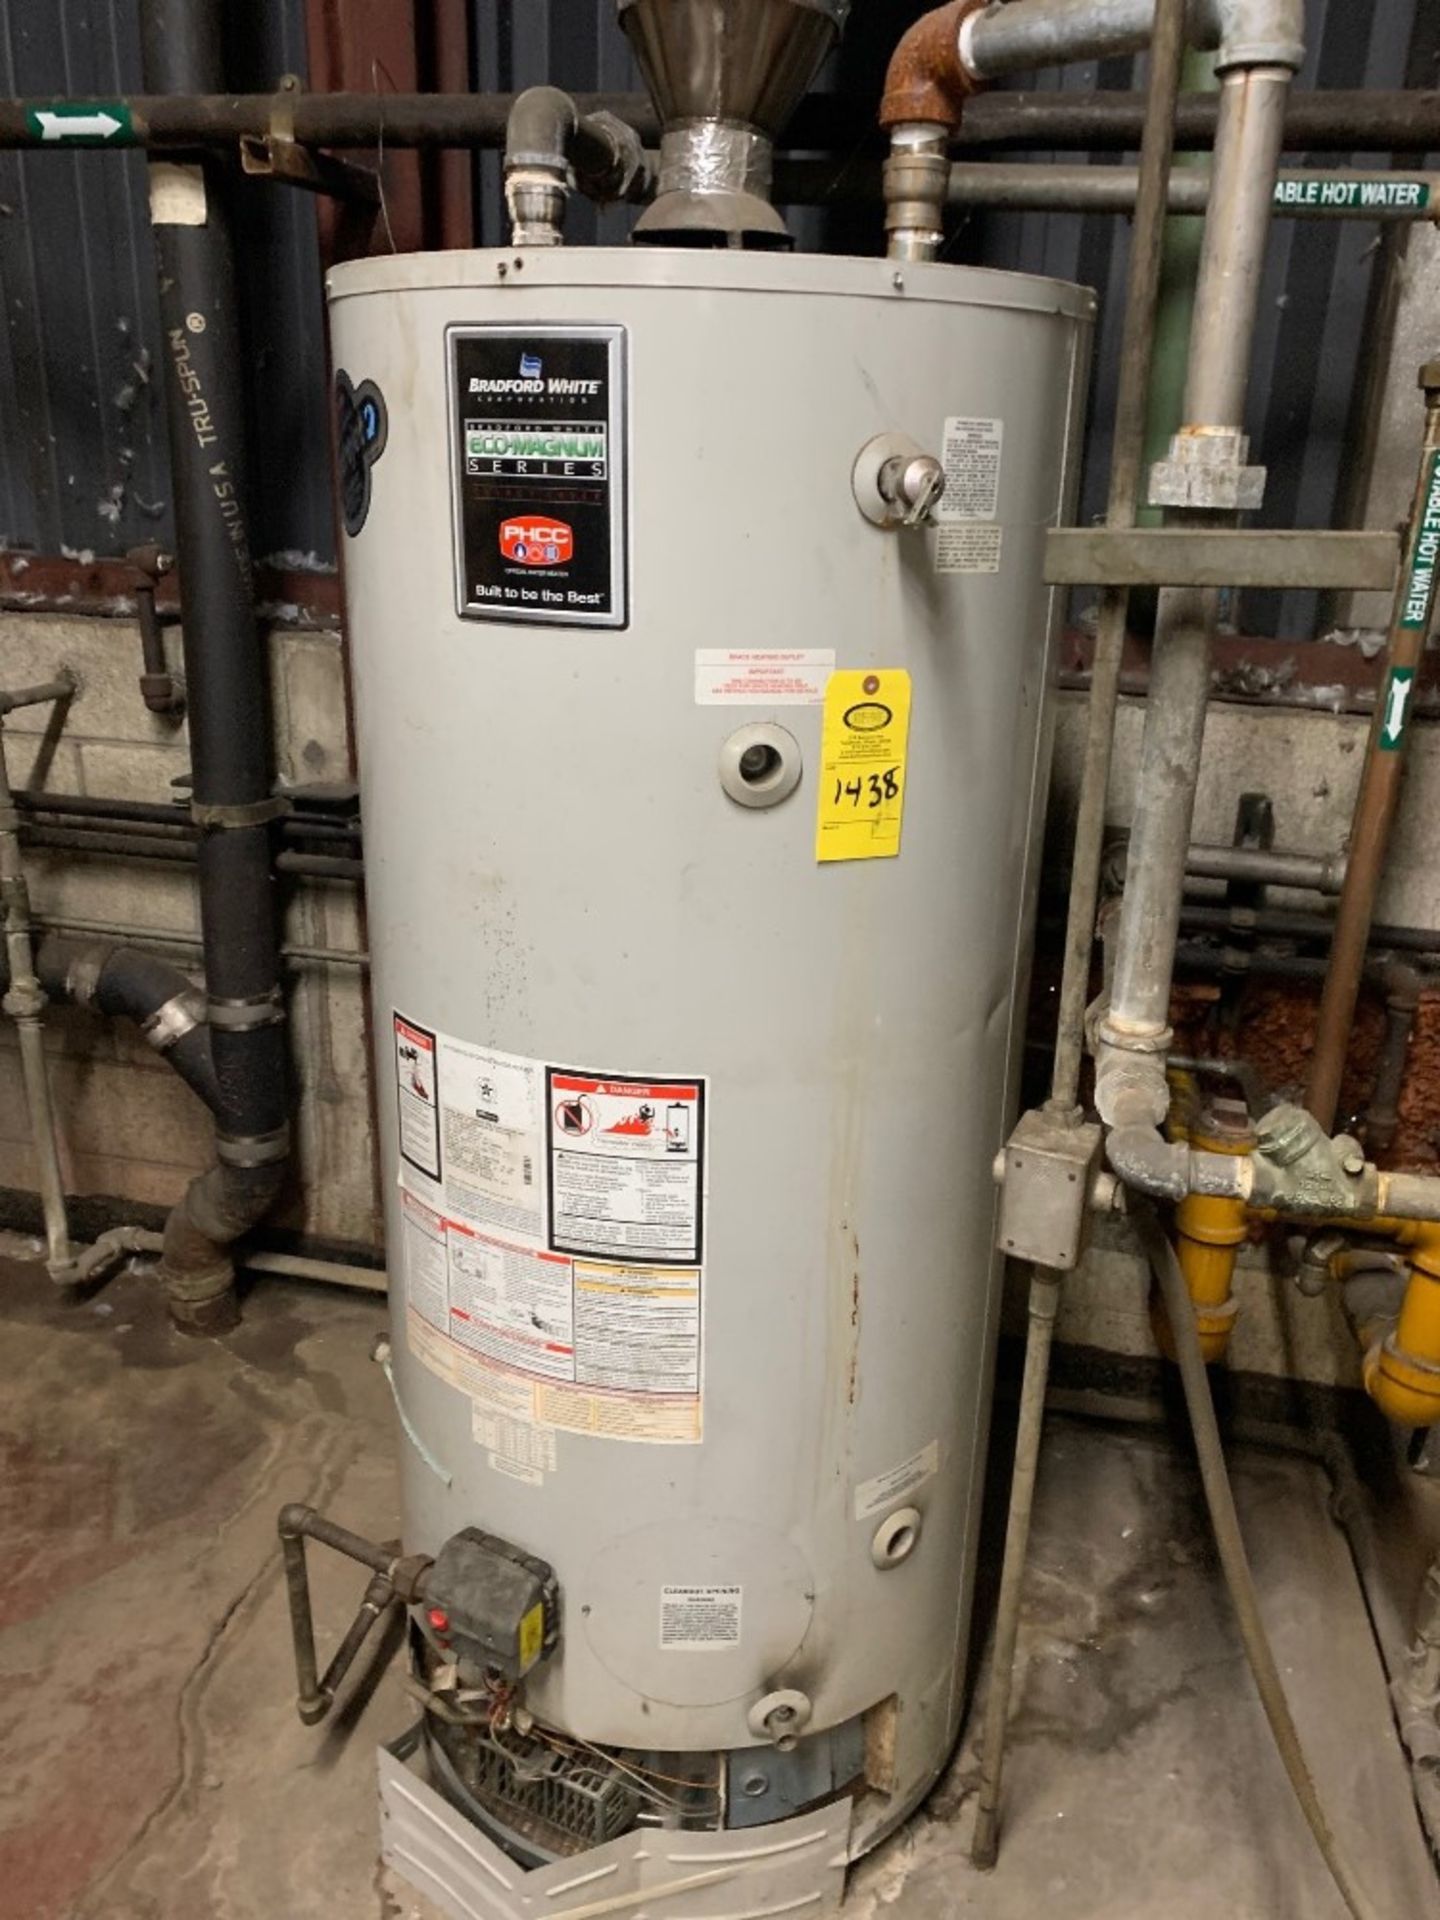 Bradford White Mdl. ULG2100H853N Hot Water Heater, 100 gallons, Ser. #ML36972089, natural gas: